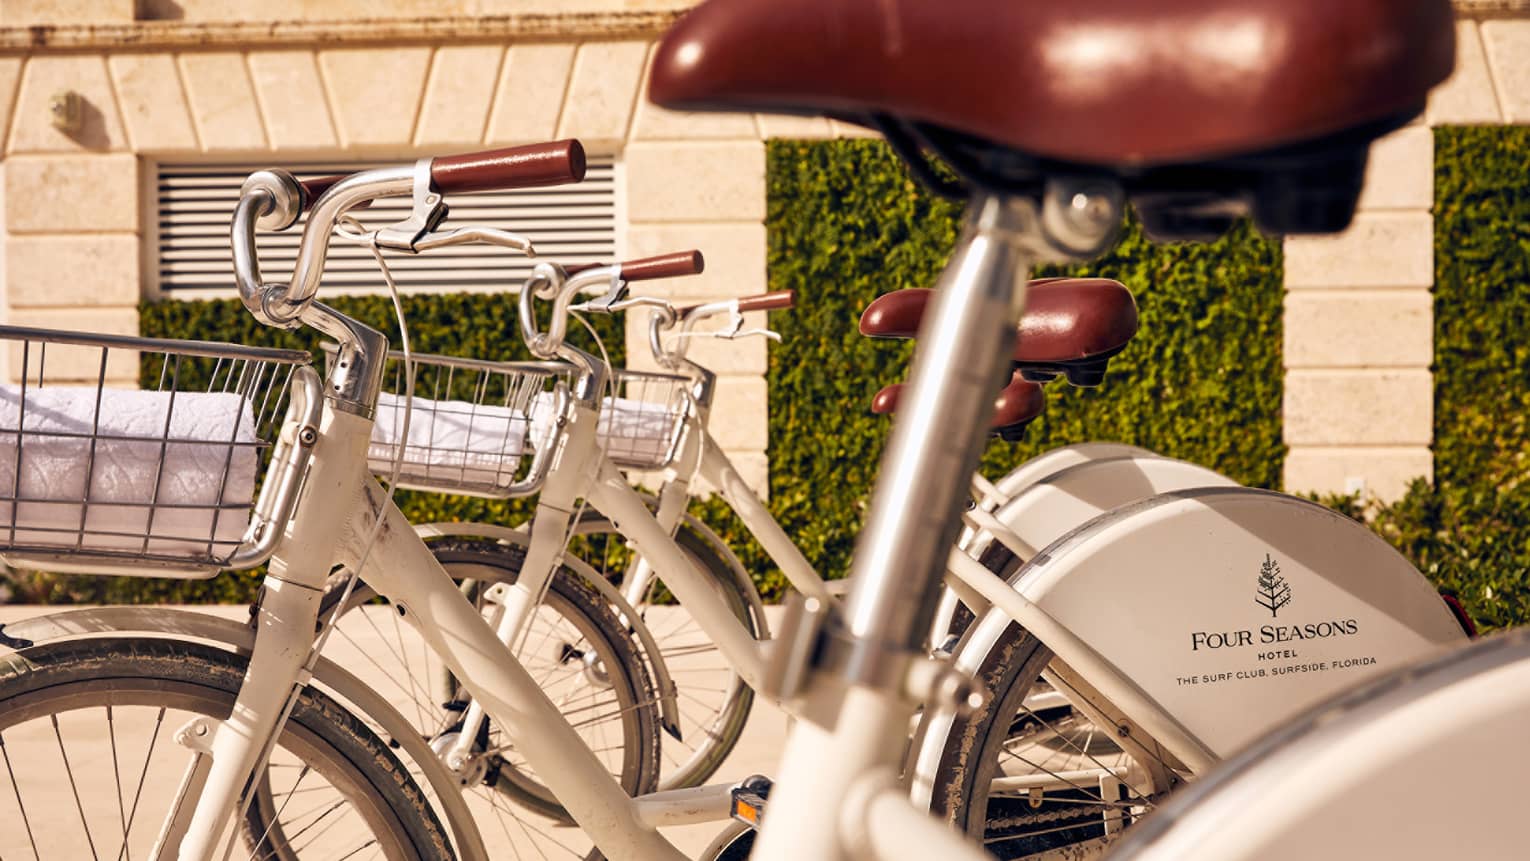 A close up image of white bikes with baskets.